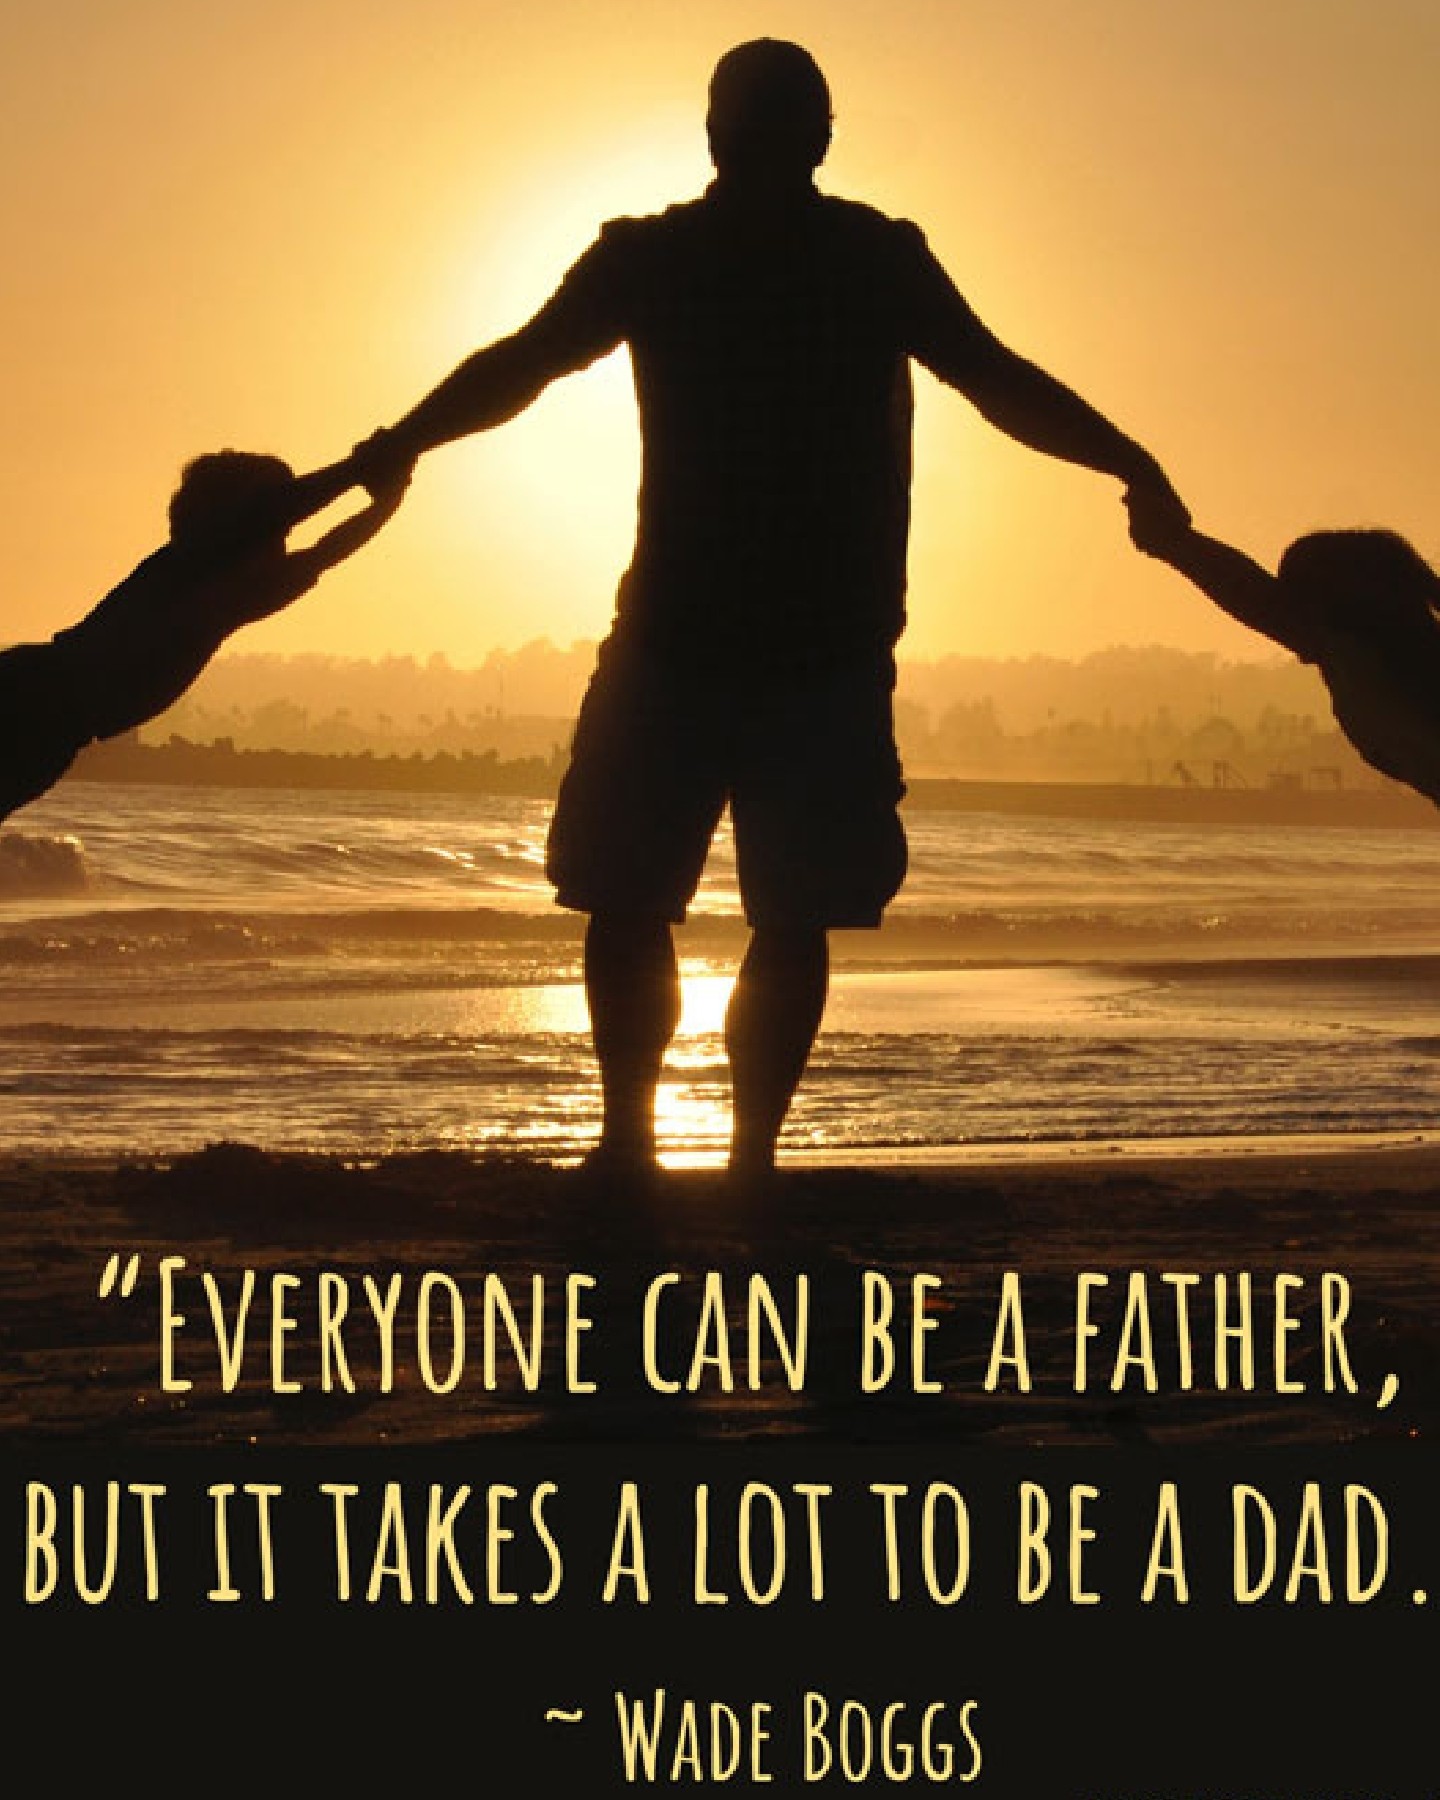 Happy Fathers Day!! Tell your Dad that you love him and appreciate him!!